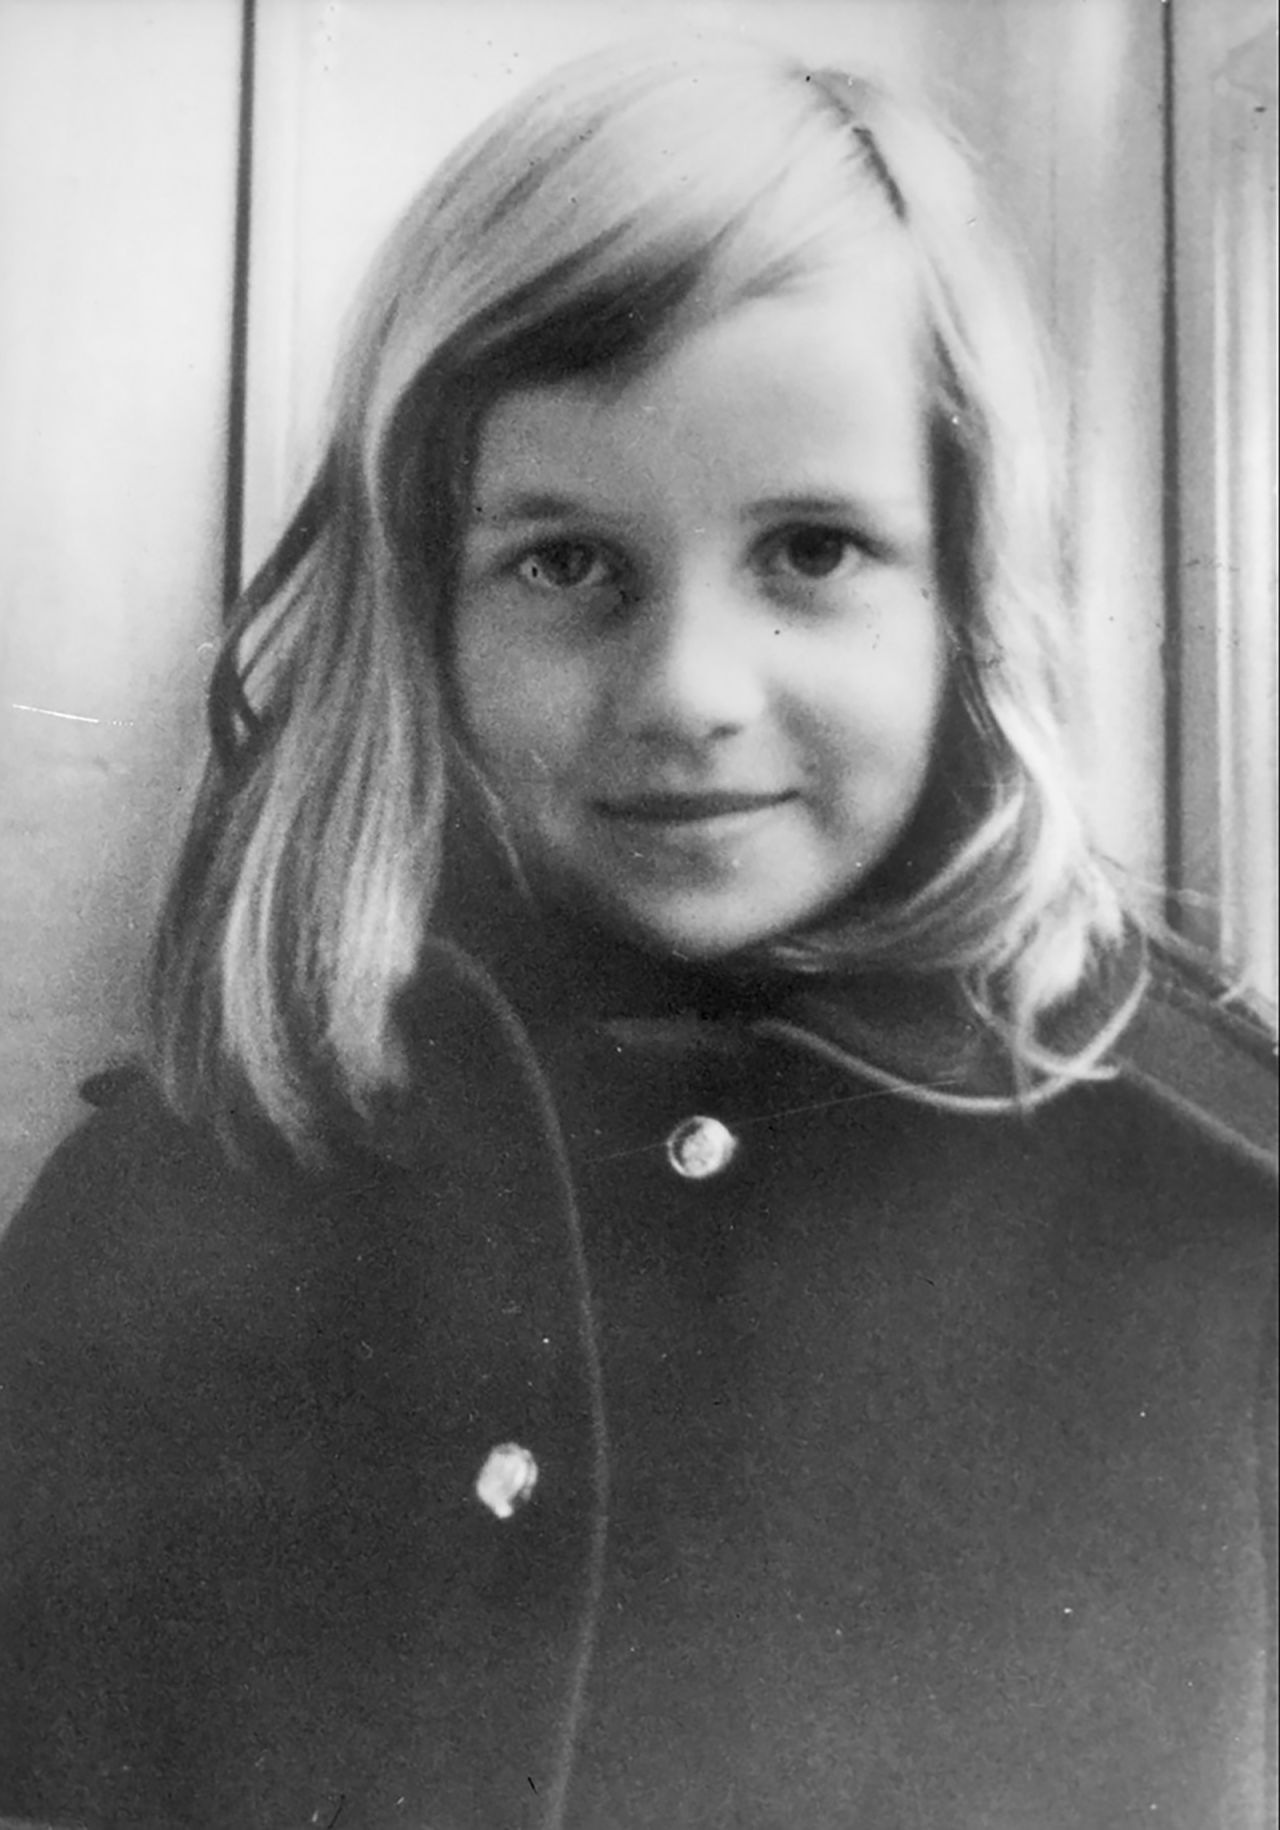 Diana circa 1965. Growing up, she attended private schools in England and Switzerland.